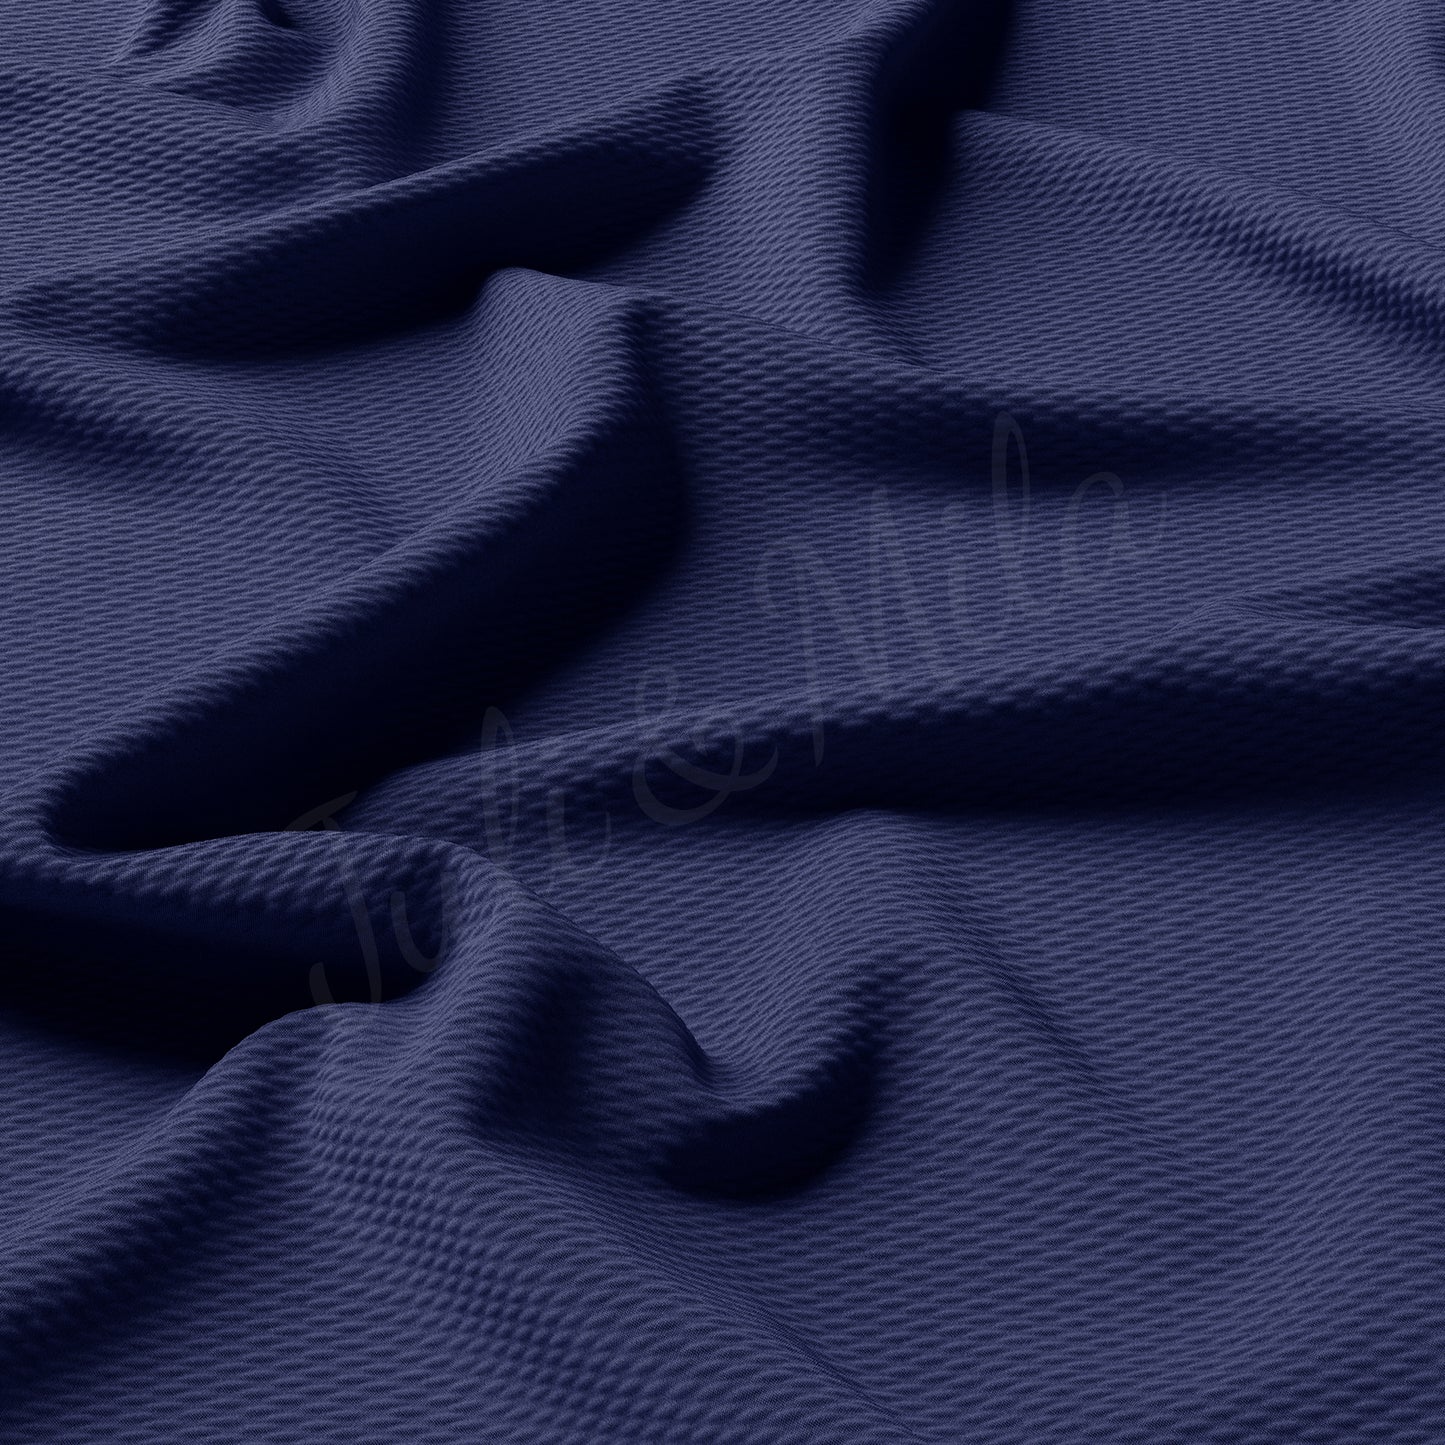 Royal Blue Liverpool Bullet Textured Fabric